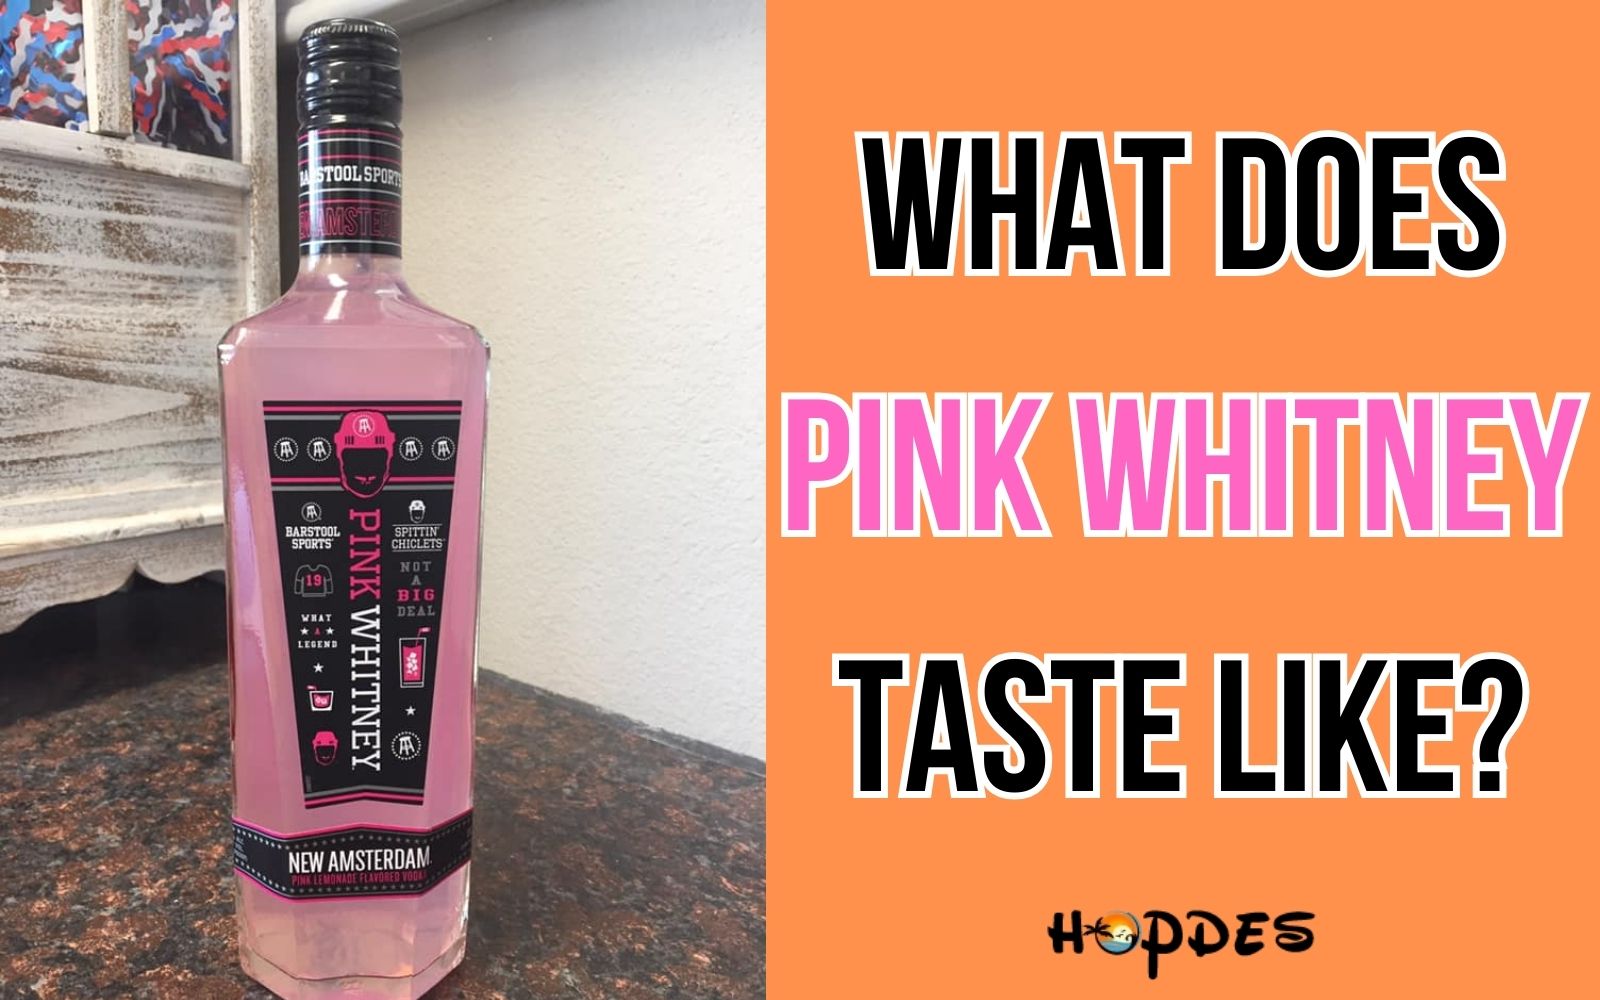 What Does Pink Whitney Taste Like?